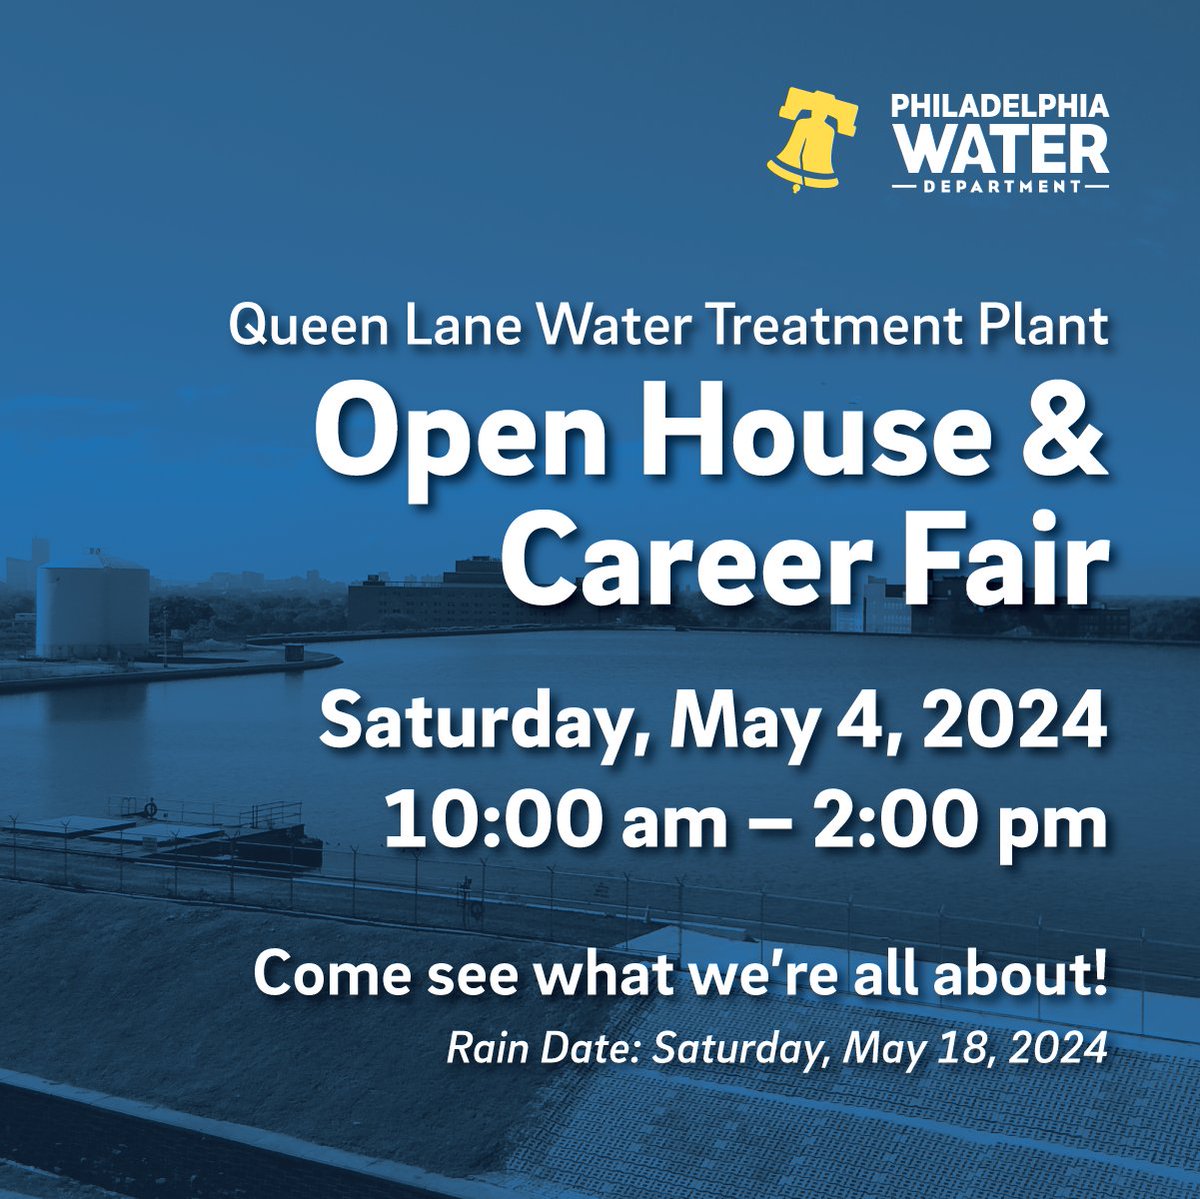 · Learn about the water treatment process · Explore career opportunities at PWD Bonus: The Office of Reentry Partnerships will be on hand to provide resources to returning citizens looking for employment. Come see what we're all about! Details here: water.phila.gov/open-house